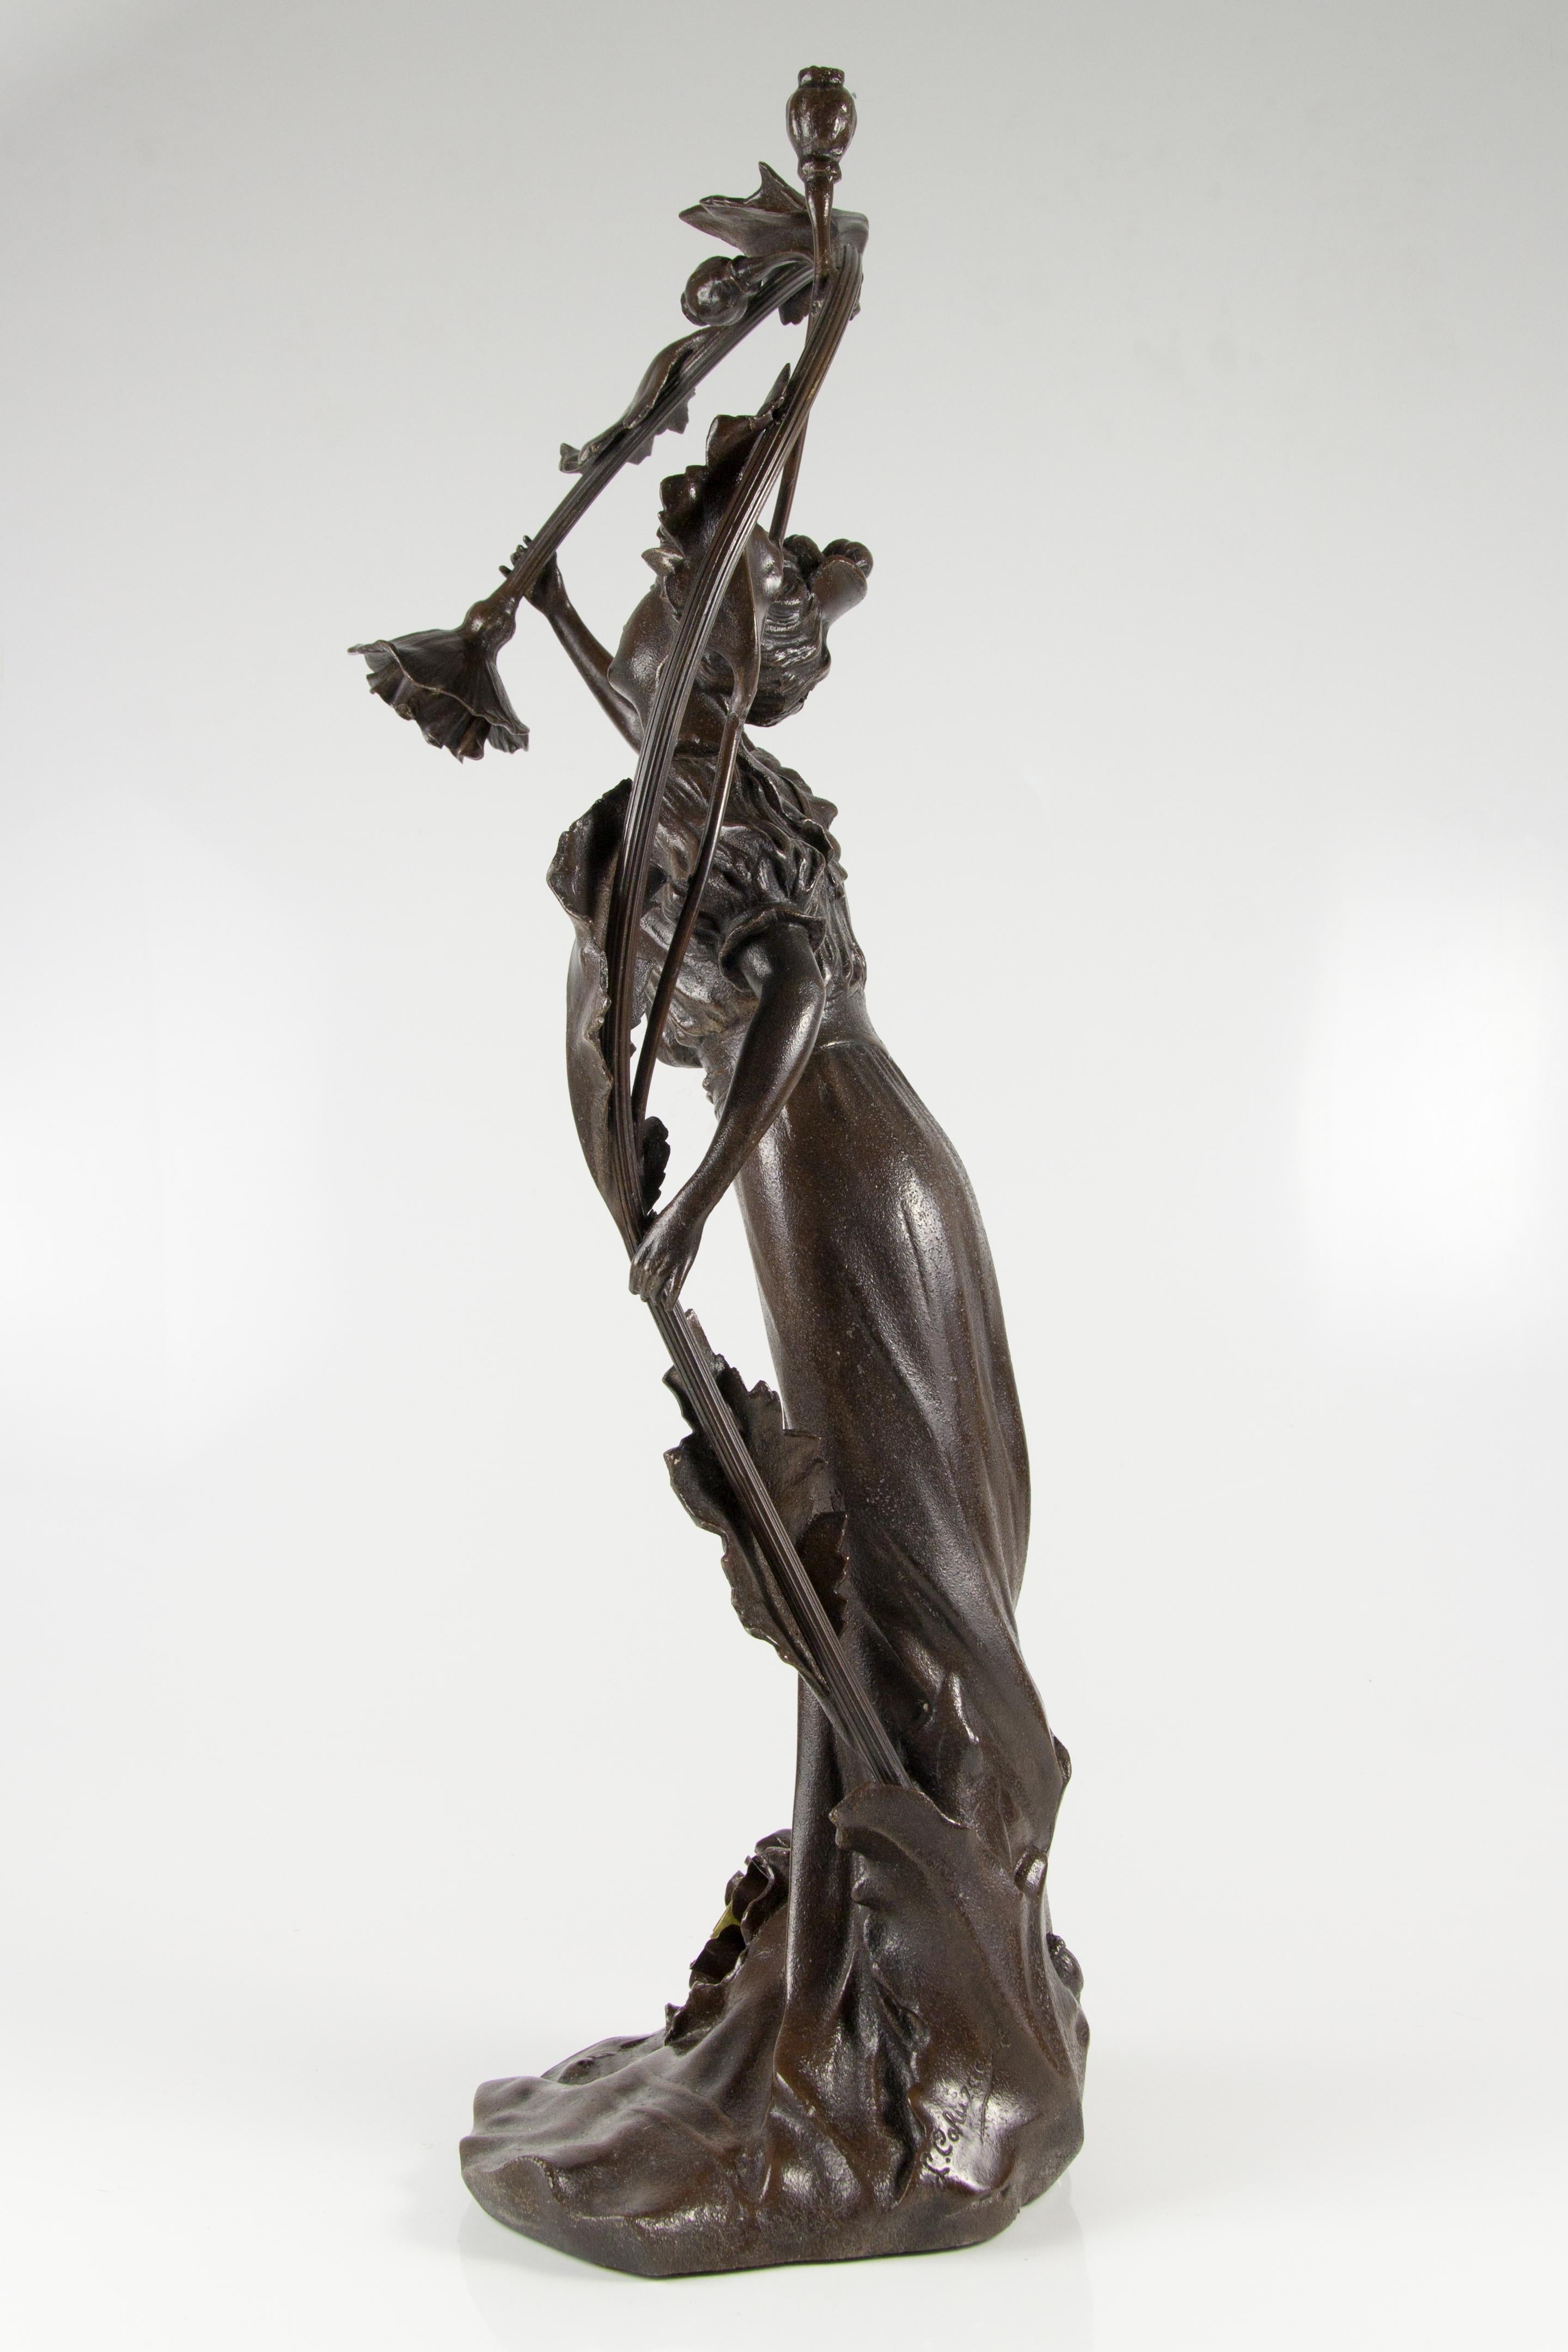 A stunning Art Nouveau style spelter figural lamp with a young lady figure holding poppy flower. Two sockets for B 15 light bulbs.
Measures:
Height 67 cm / 26.37 in; width 30 cm / 11.81 in; depth 23 cm / 9.05 in.
Base 21 cm x 21 cm / 8.26 in x